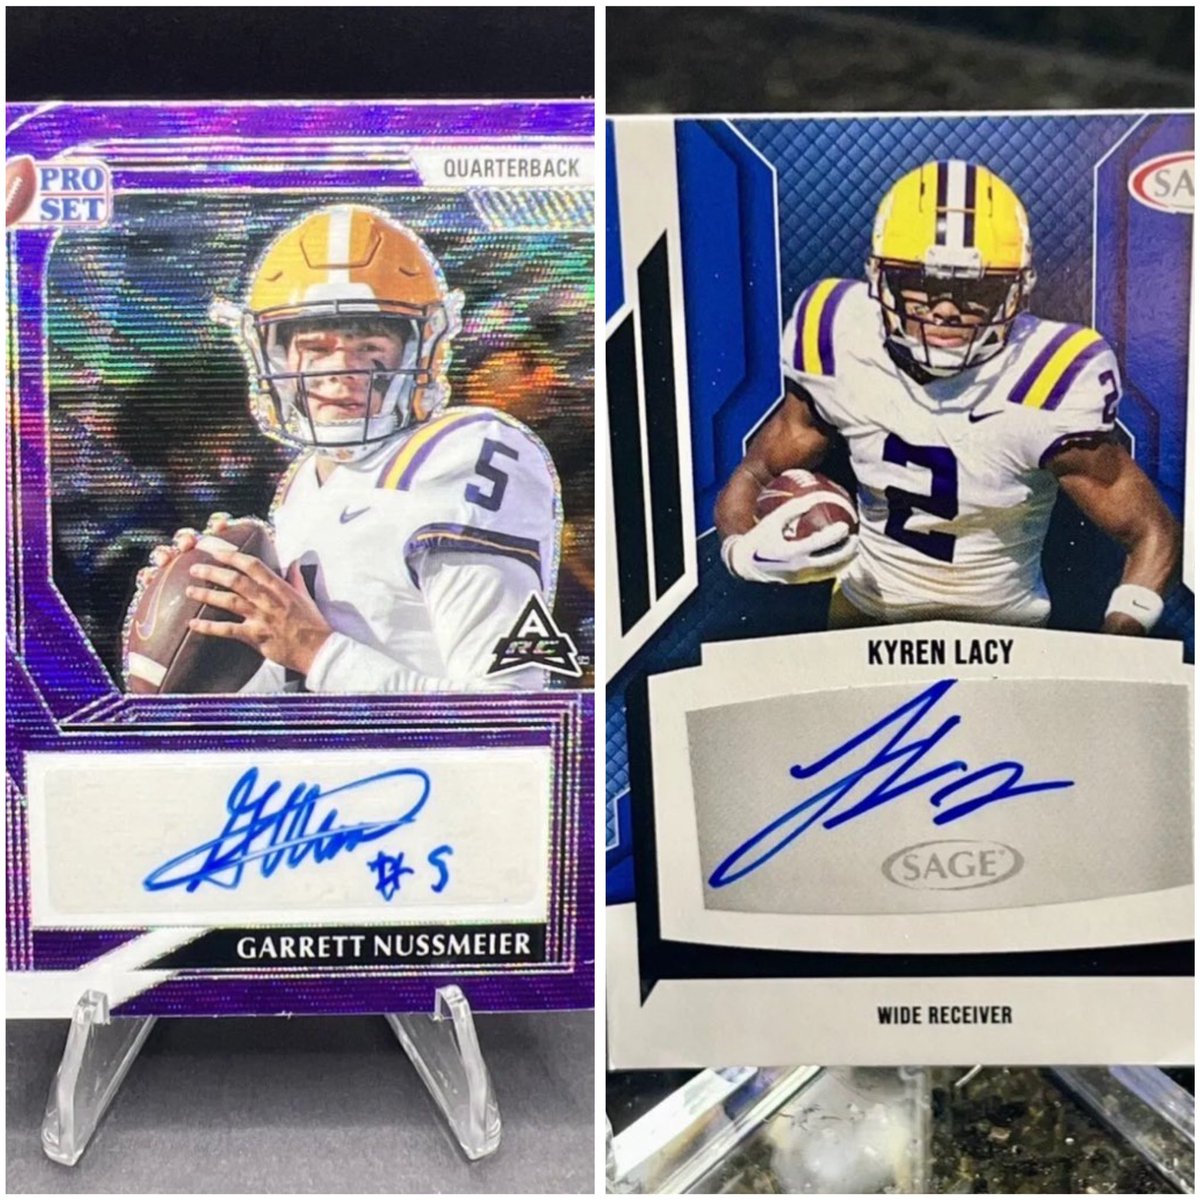 🚨| GIVEAWAY | 🚨 Follow me and retweet this post for a chance to win a Garrett Nussmeier and Kyren Lacy autograph. The winner will receive both cards on me - free of charge. Bonus entry: tag 2 friends in the comments below for an extra slot on the randomized wheel. Geaux…